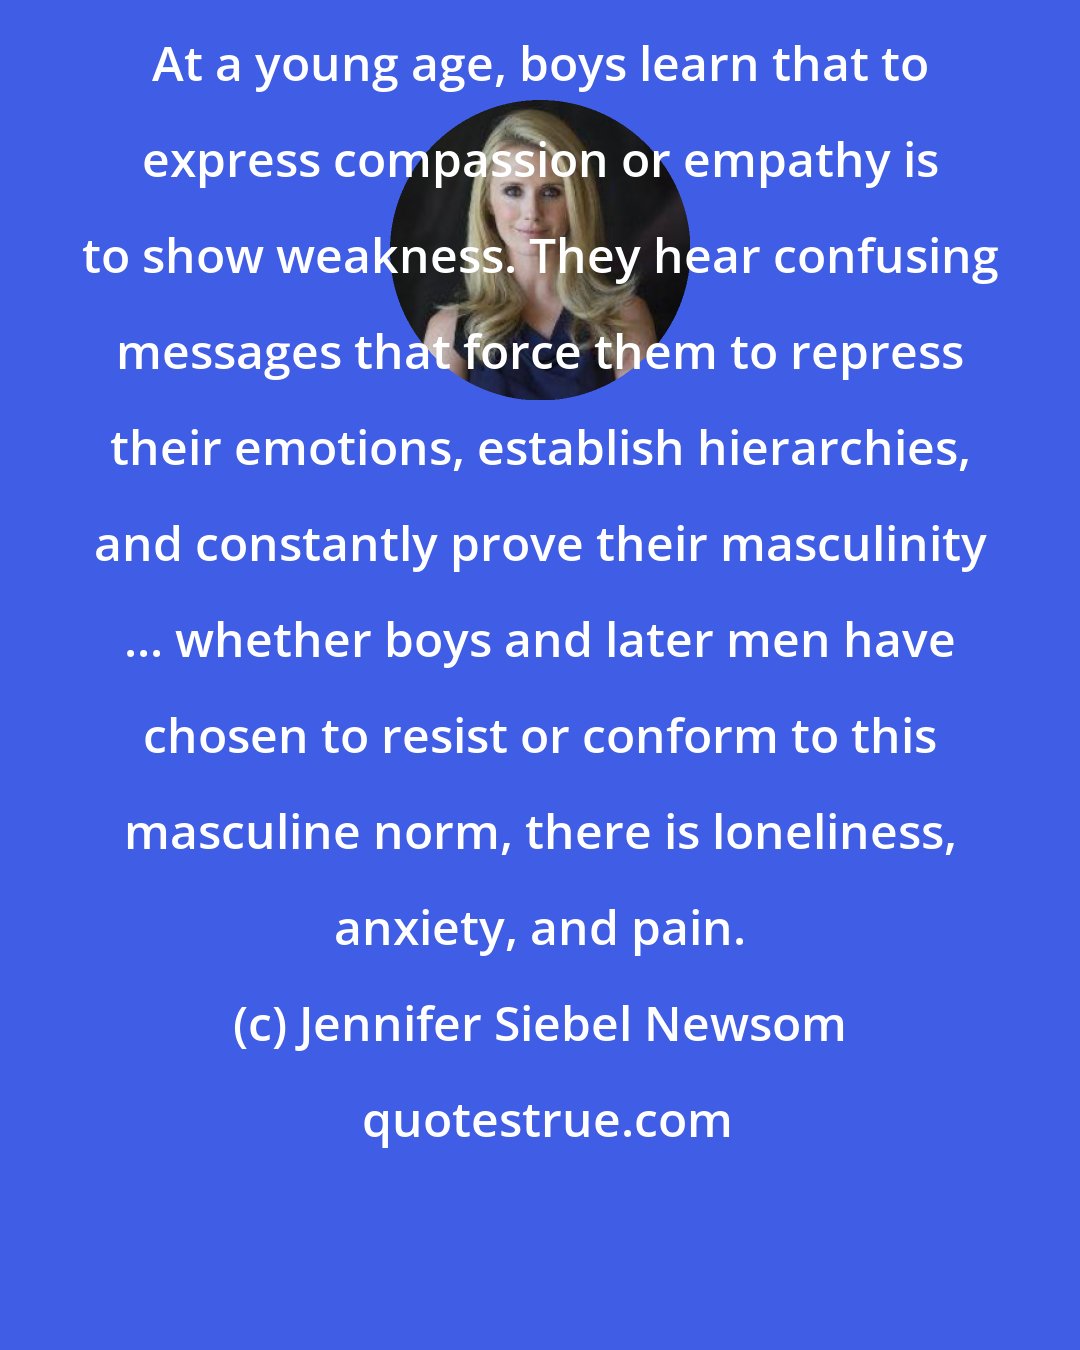 Jennifer Siebel Newsom: At a young age, boys learn that to express compassion or empathy is to show weakness. They hear confusing messages that force them to repress their emotions, establish hierarchies, and constantly prove their masculinity ... whether boys and later men have chosen to resist or conform to this masculine norm, there is loneliness, anxiety, and pain.